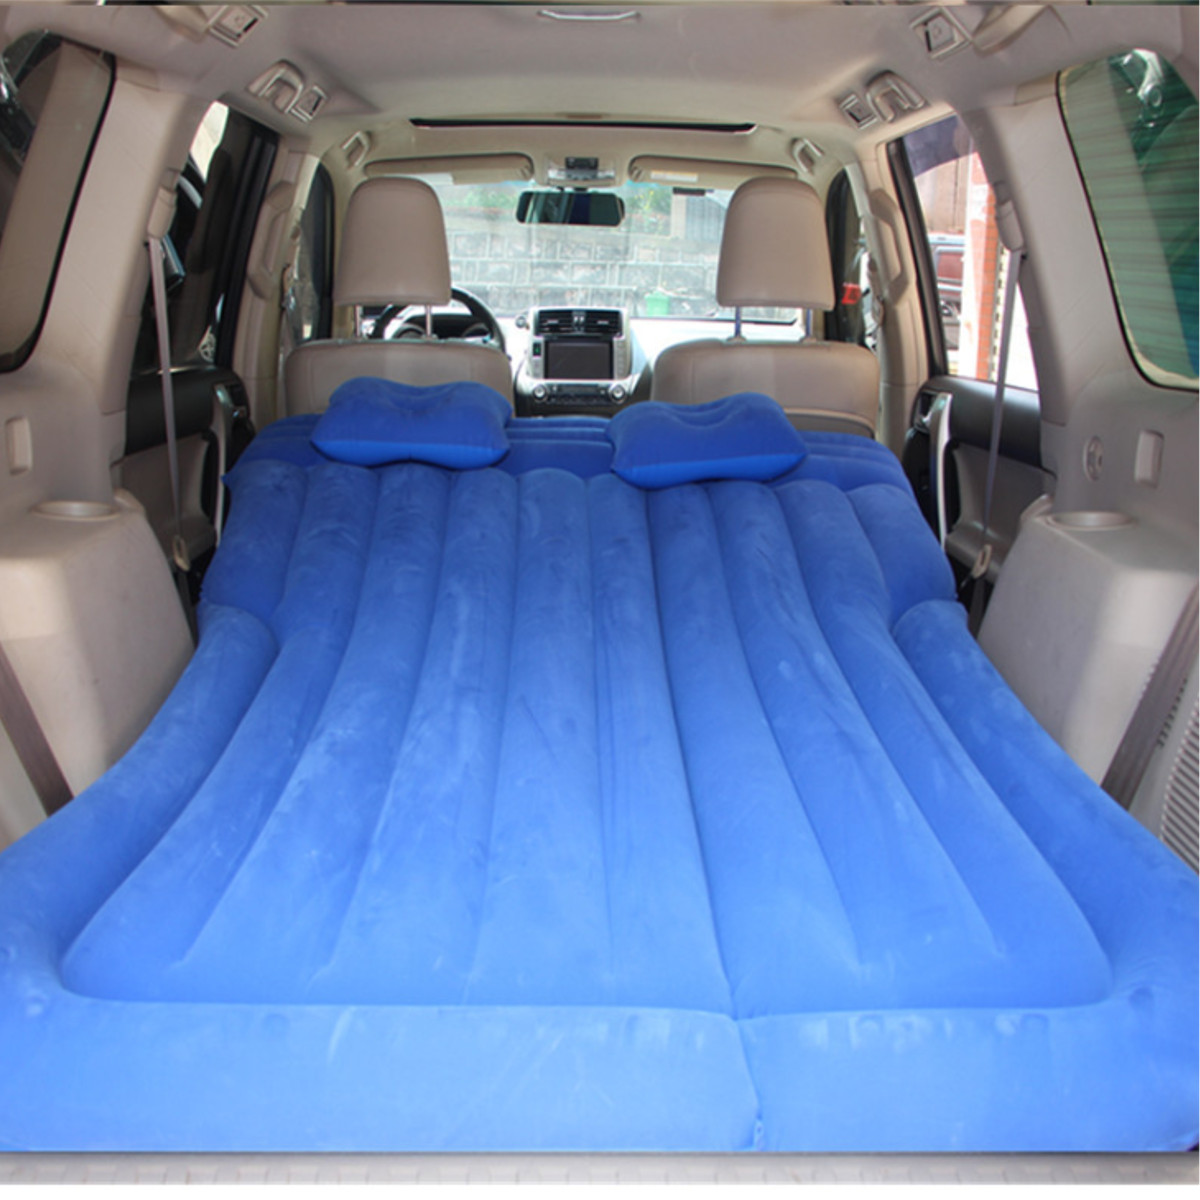 180x130cm-Multifunctional-Inflatable-Car-Air-Mattress-Durable-Back-Seat-Cover-Travel-Bed-Moisture-pr-1888970-3